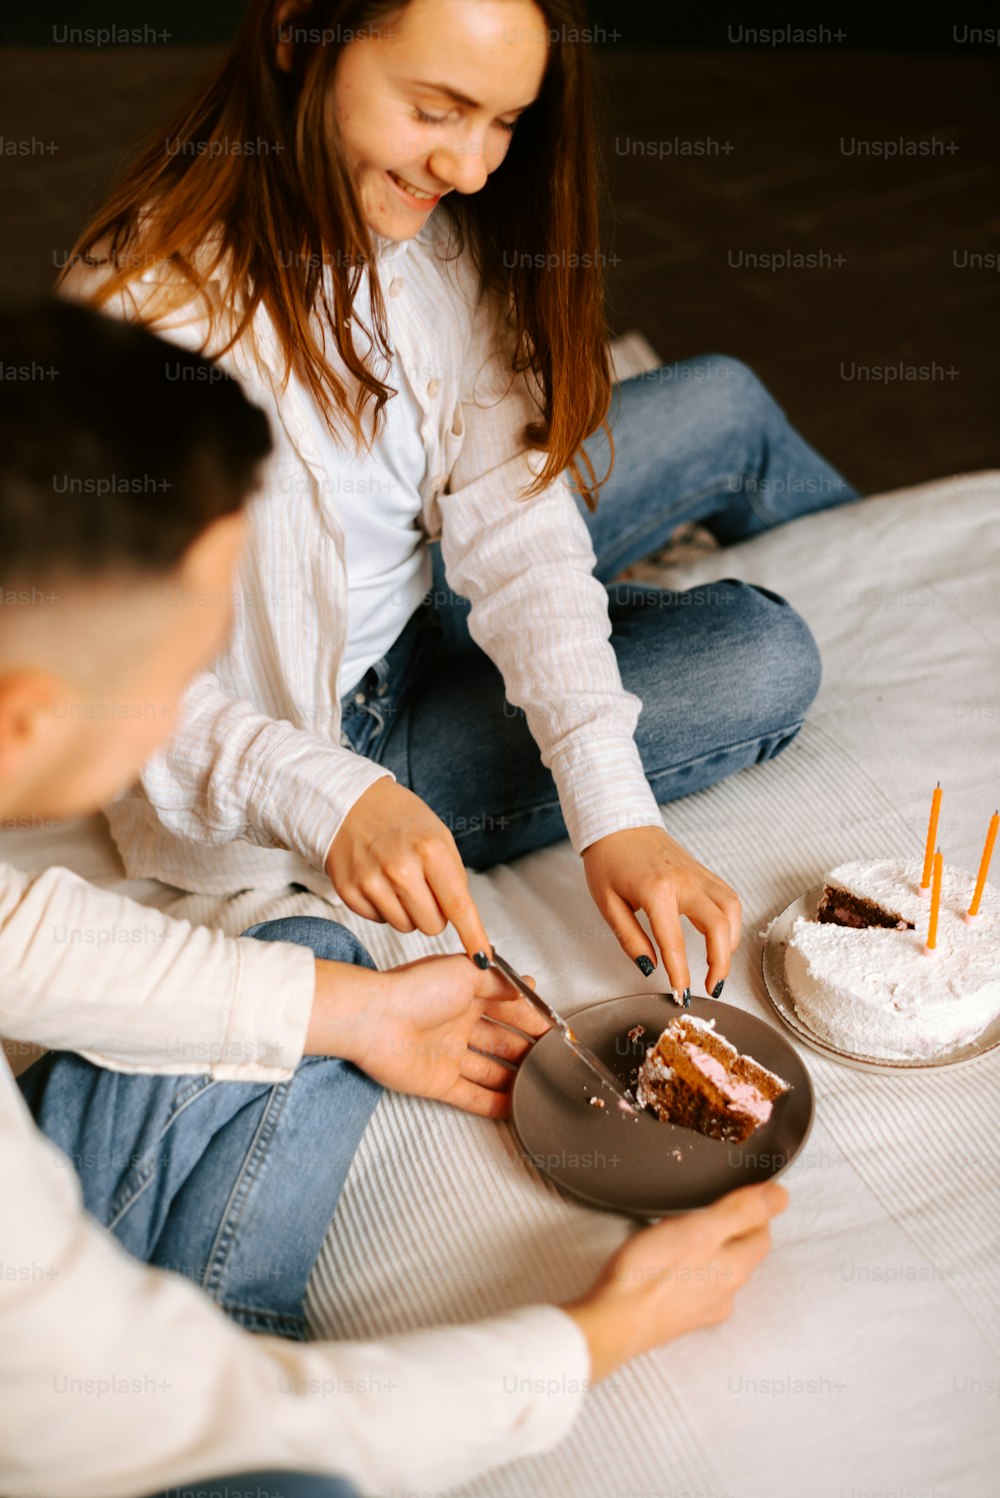 a man and a woman sitting on a bed cutting a cake